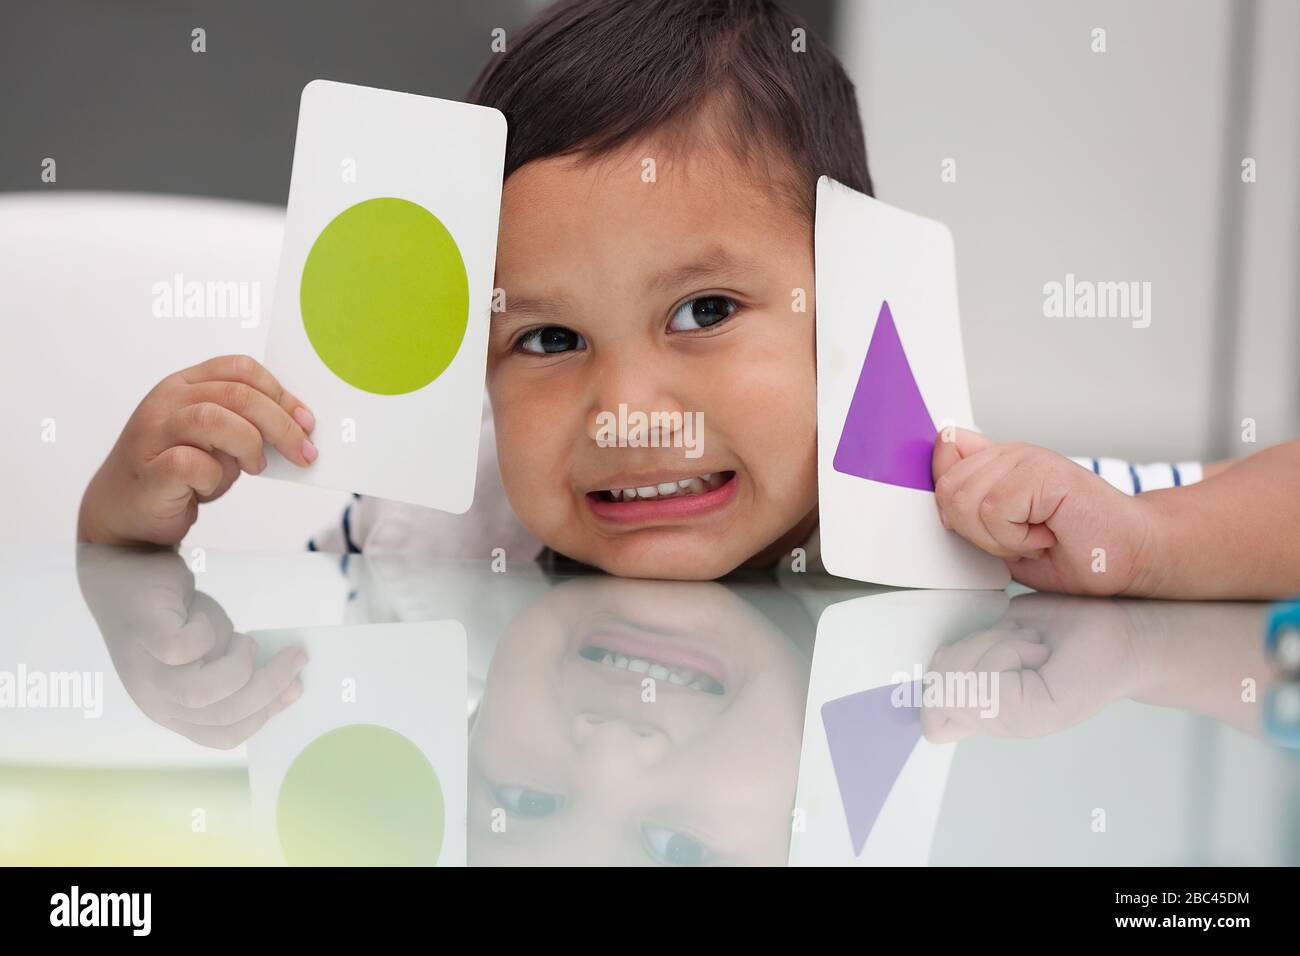 Young boy holding flash cards to learn about basic shape recognition and colors. Stock Photo